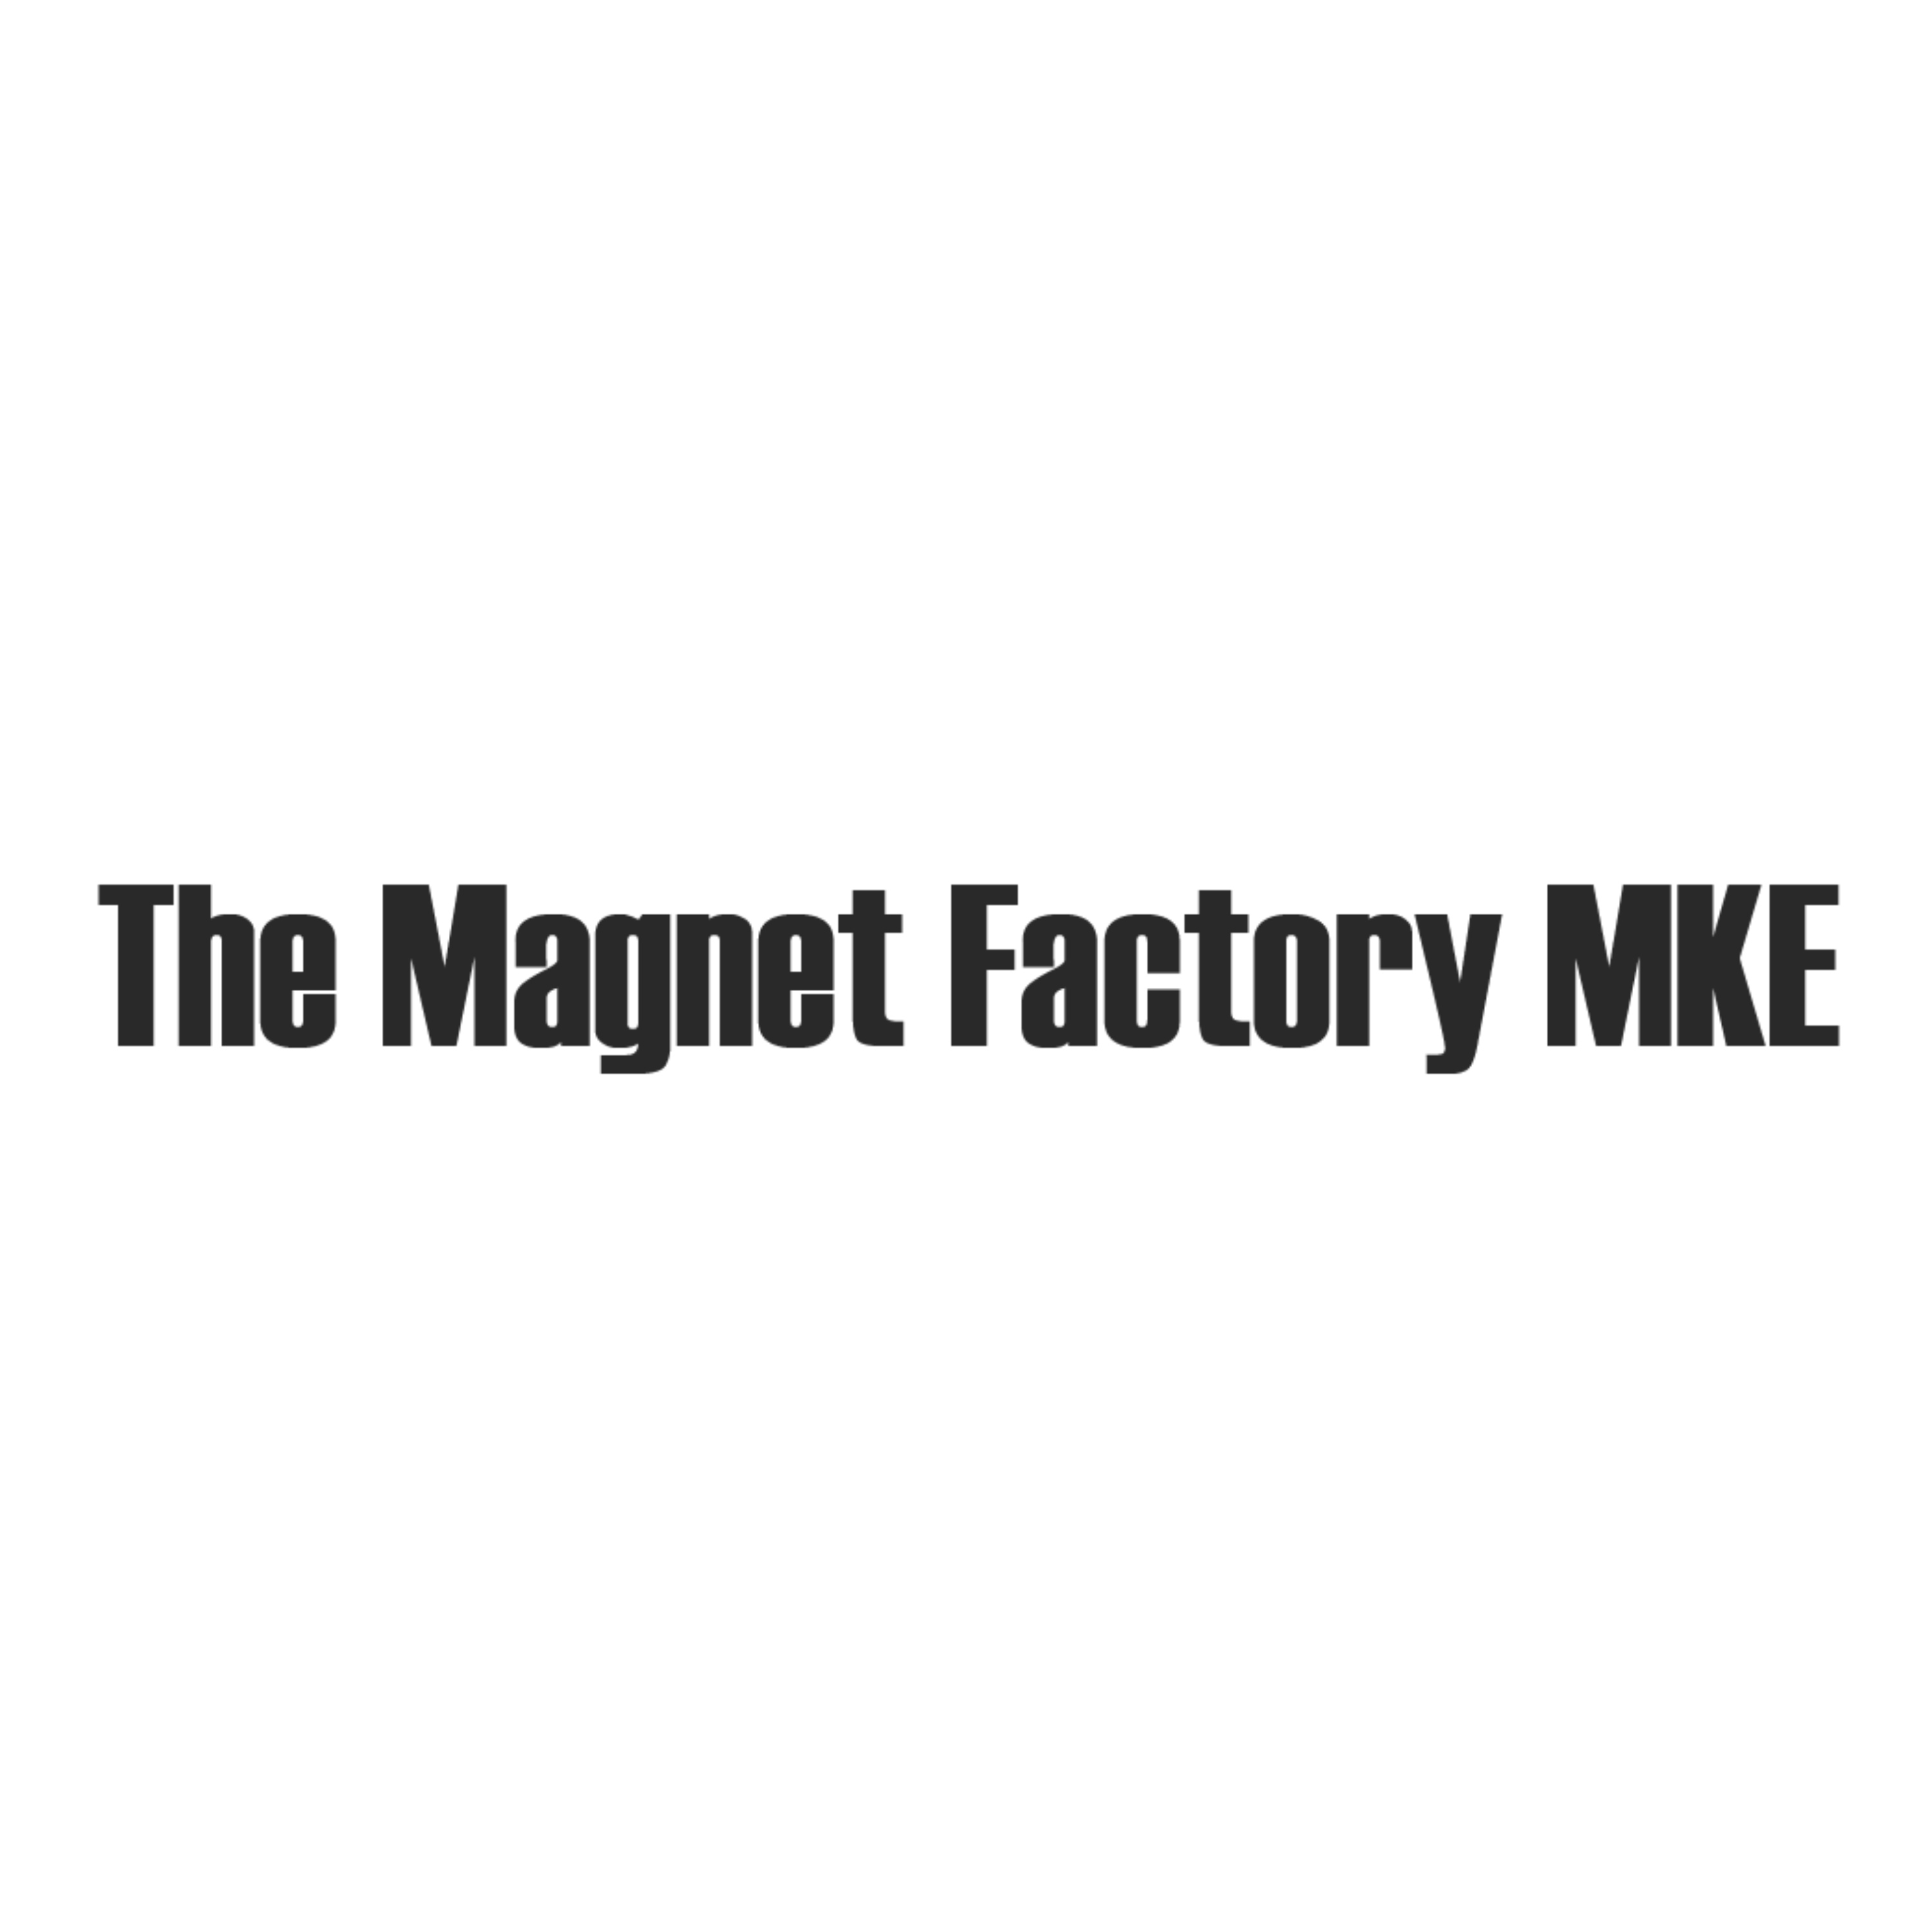 The Magnet Factory MKE